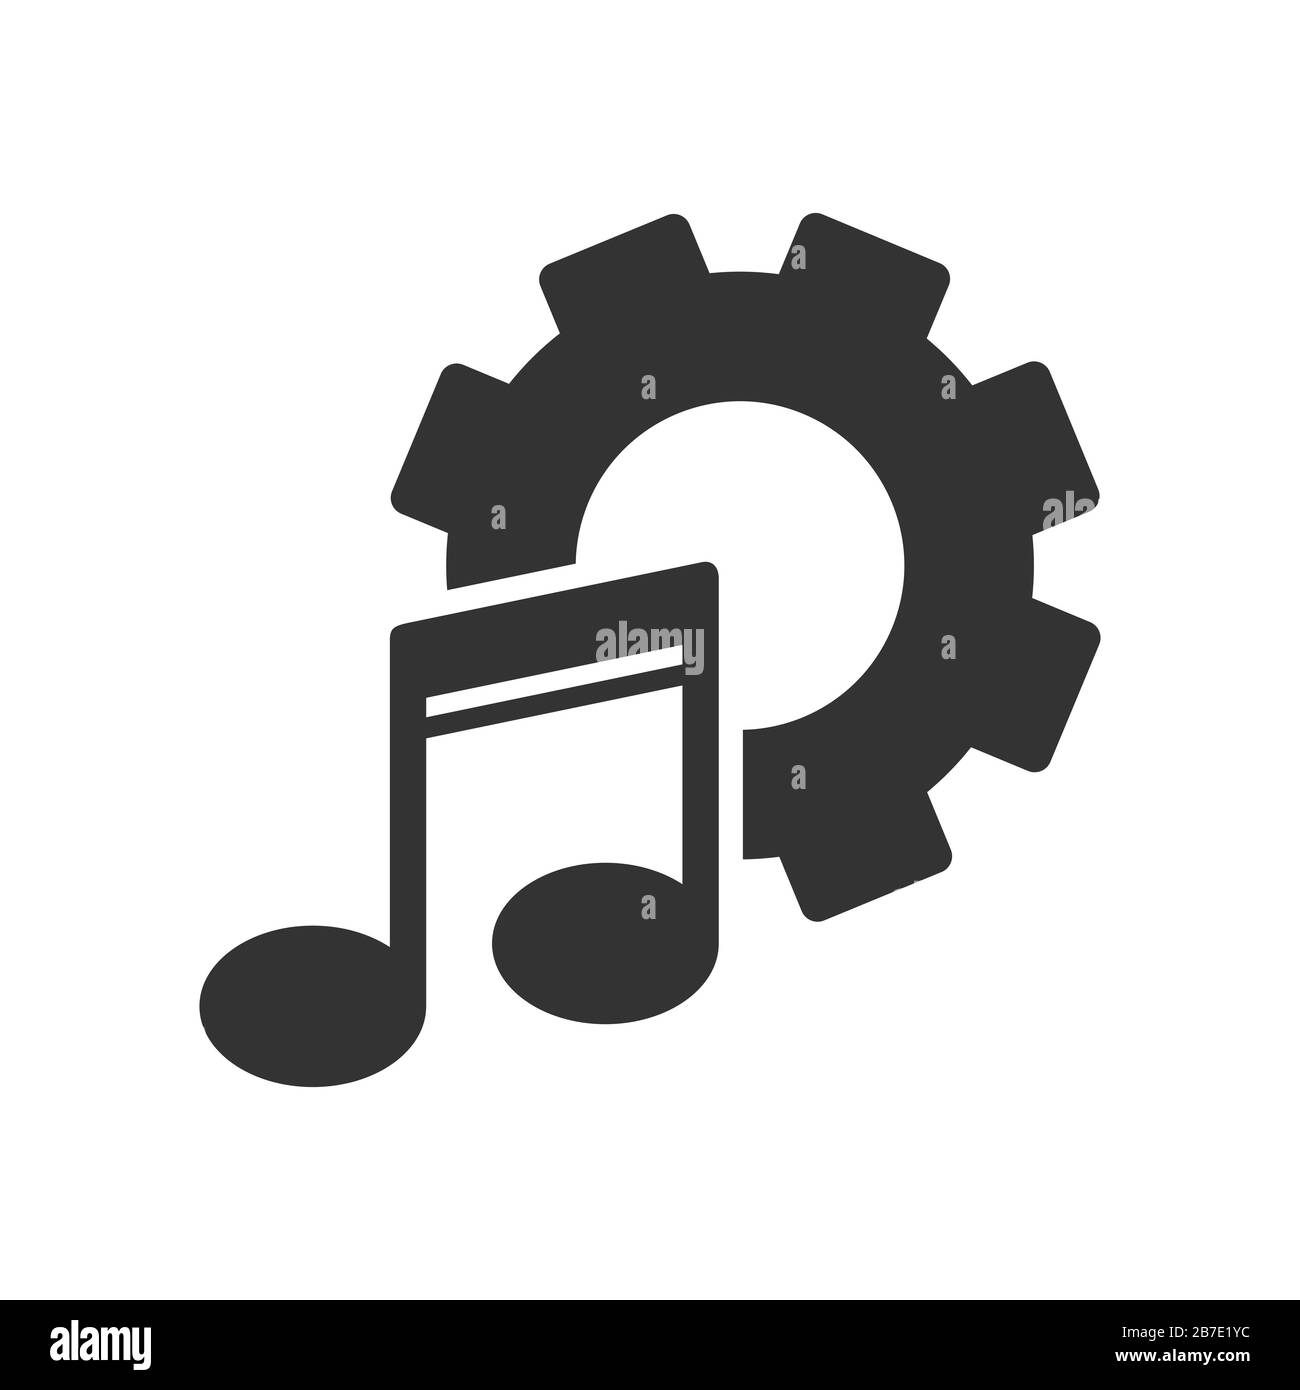 Icon of the ringtone, setting the parameters of the ringtone or music player. Simple flat design for website and app logo Stock Vector